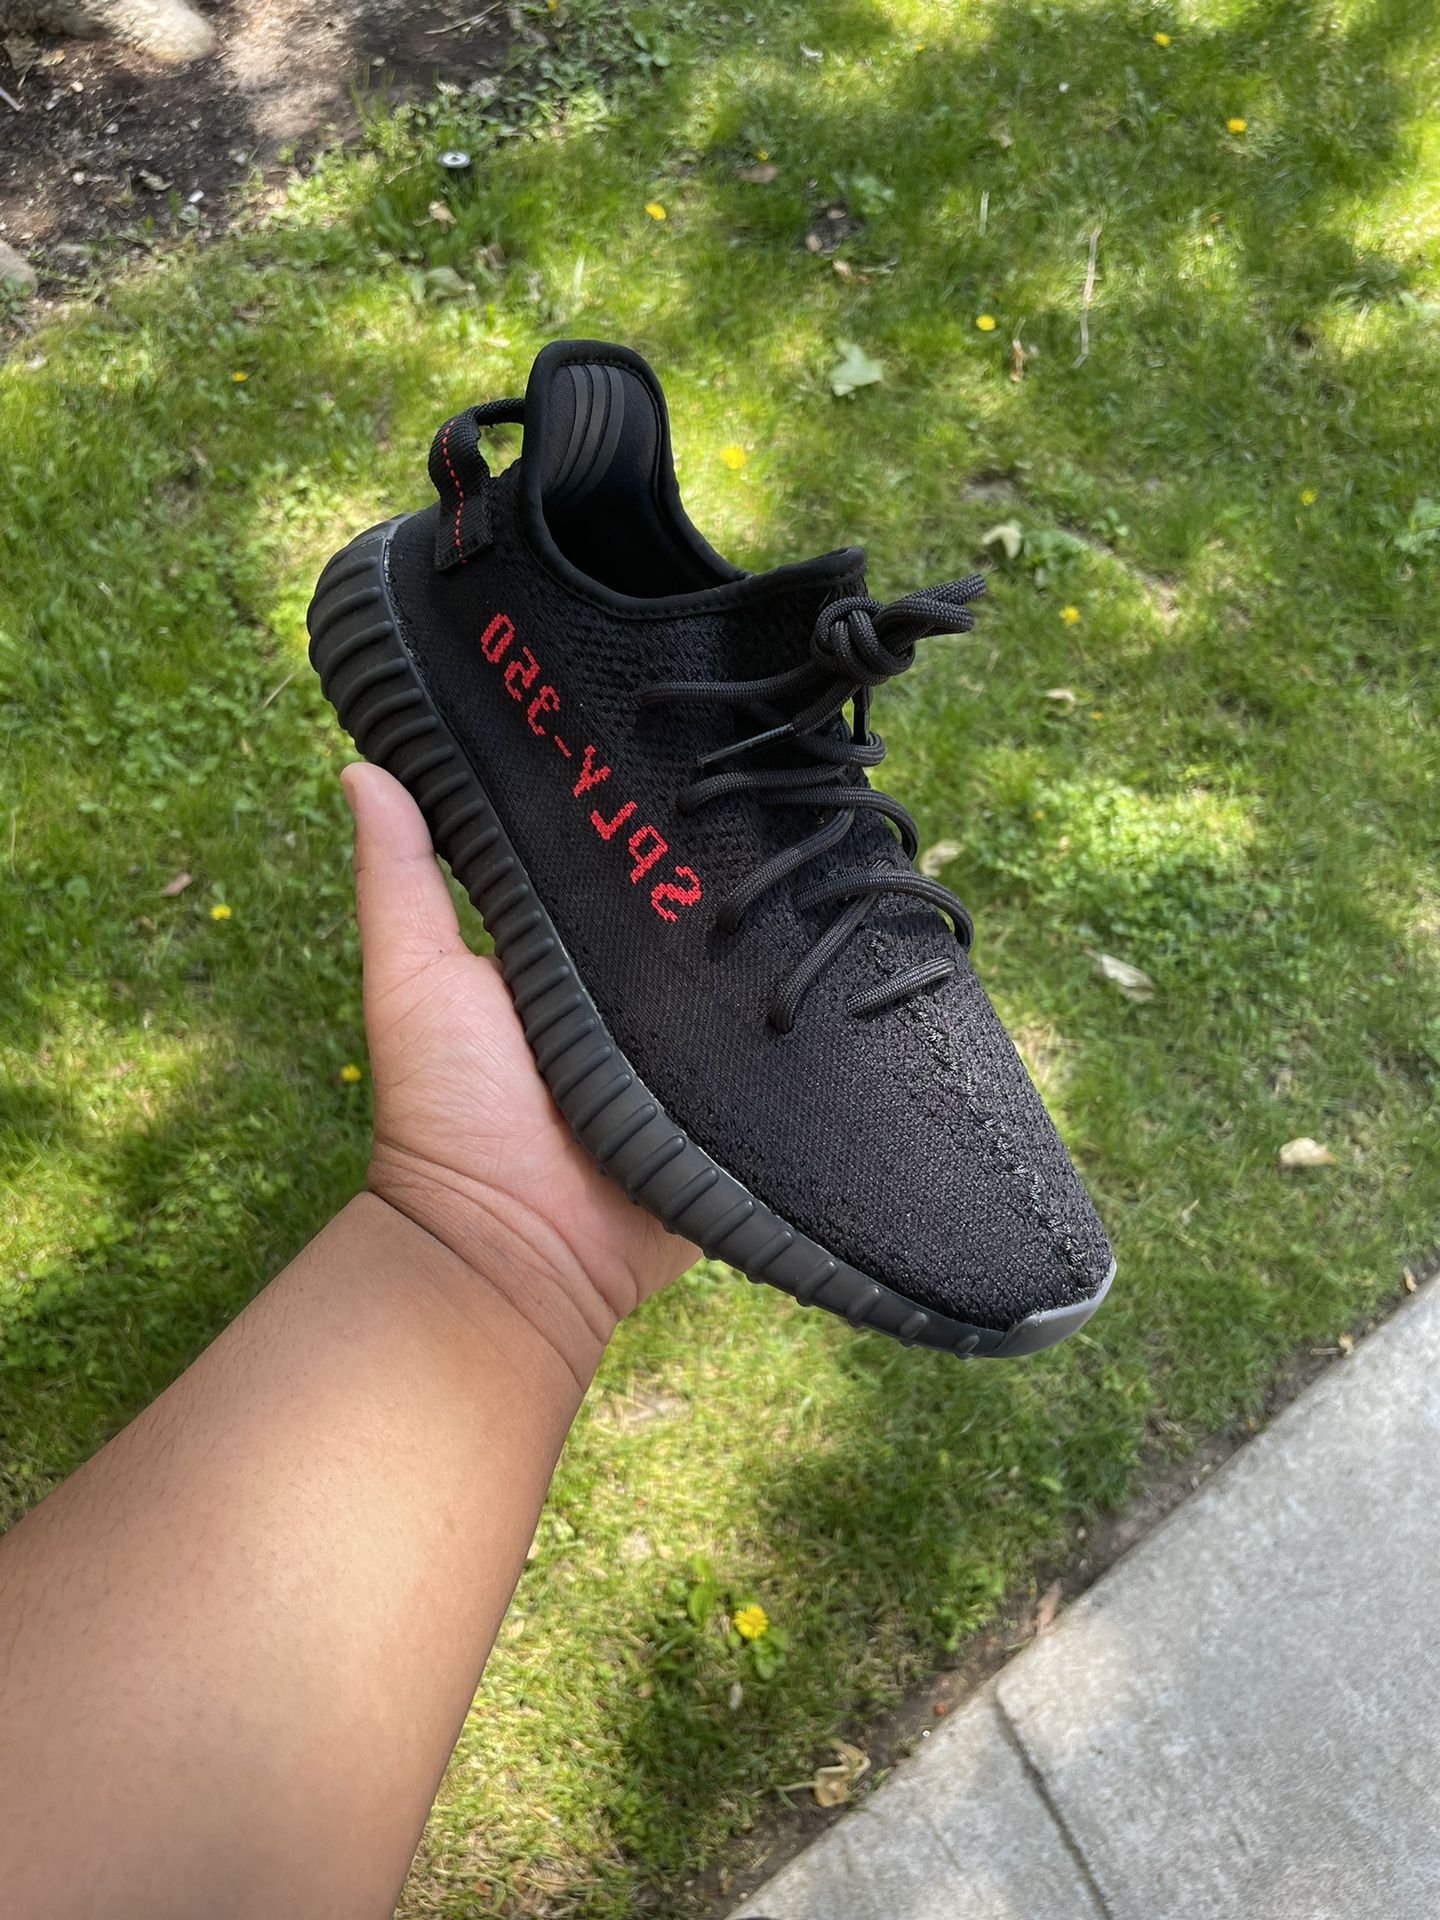 Yeezy 350 Bred Size 10M 